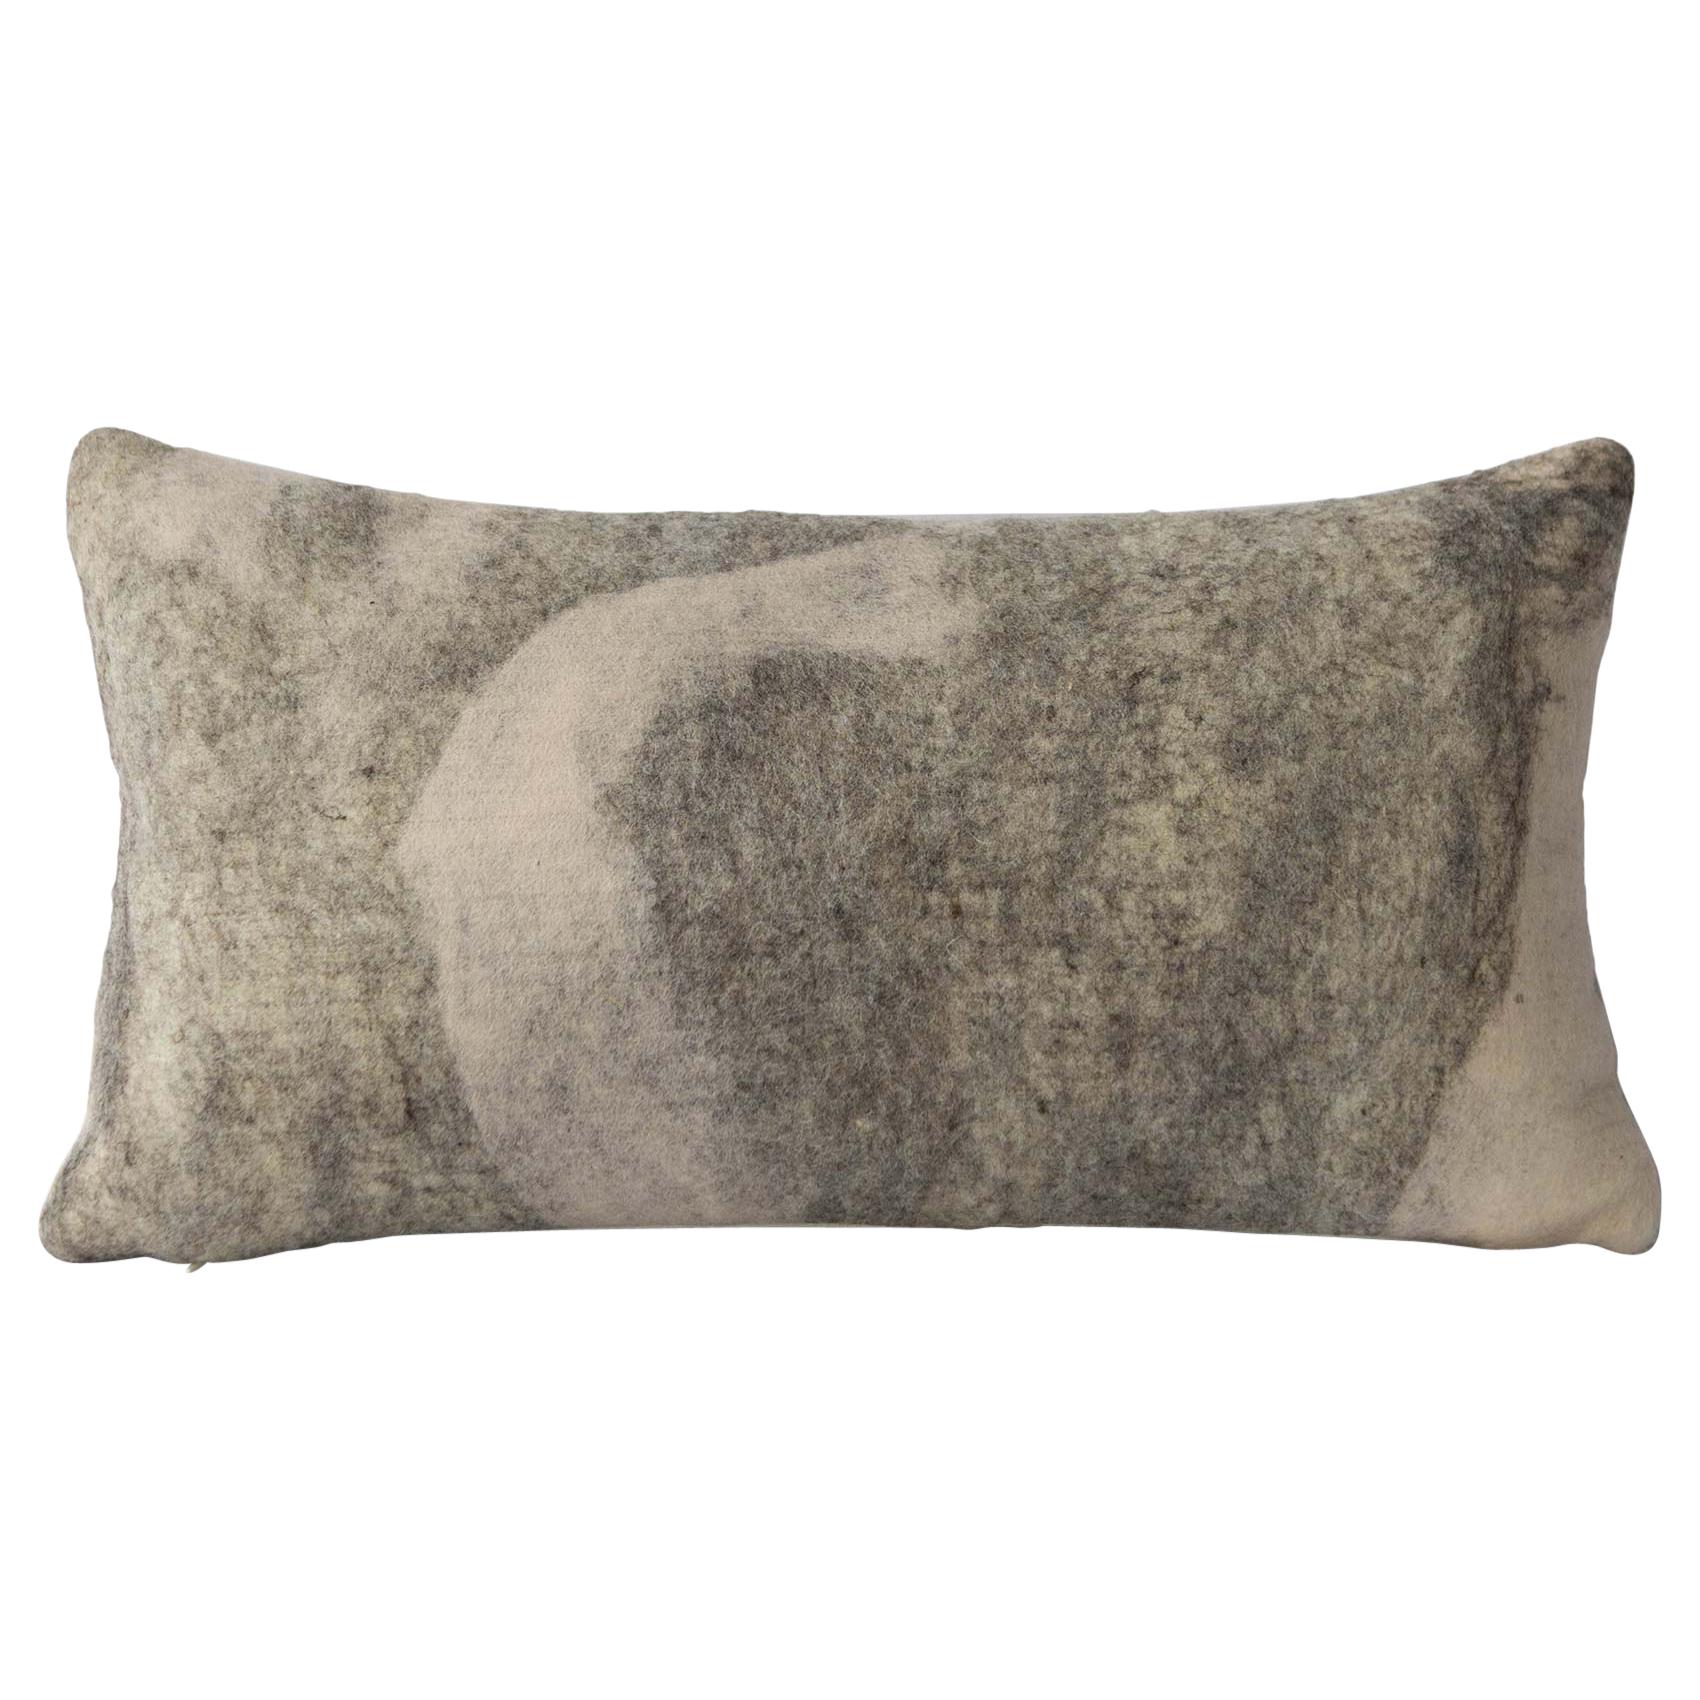 Shetland Wool Rose Pillow, Small - Heritage Sheep Collection For Sale